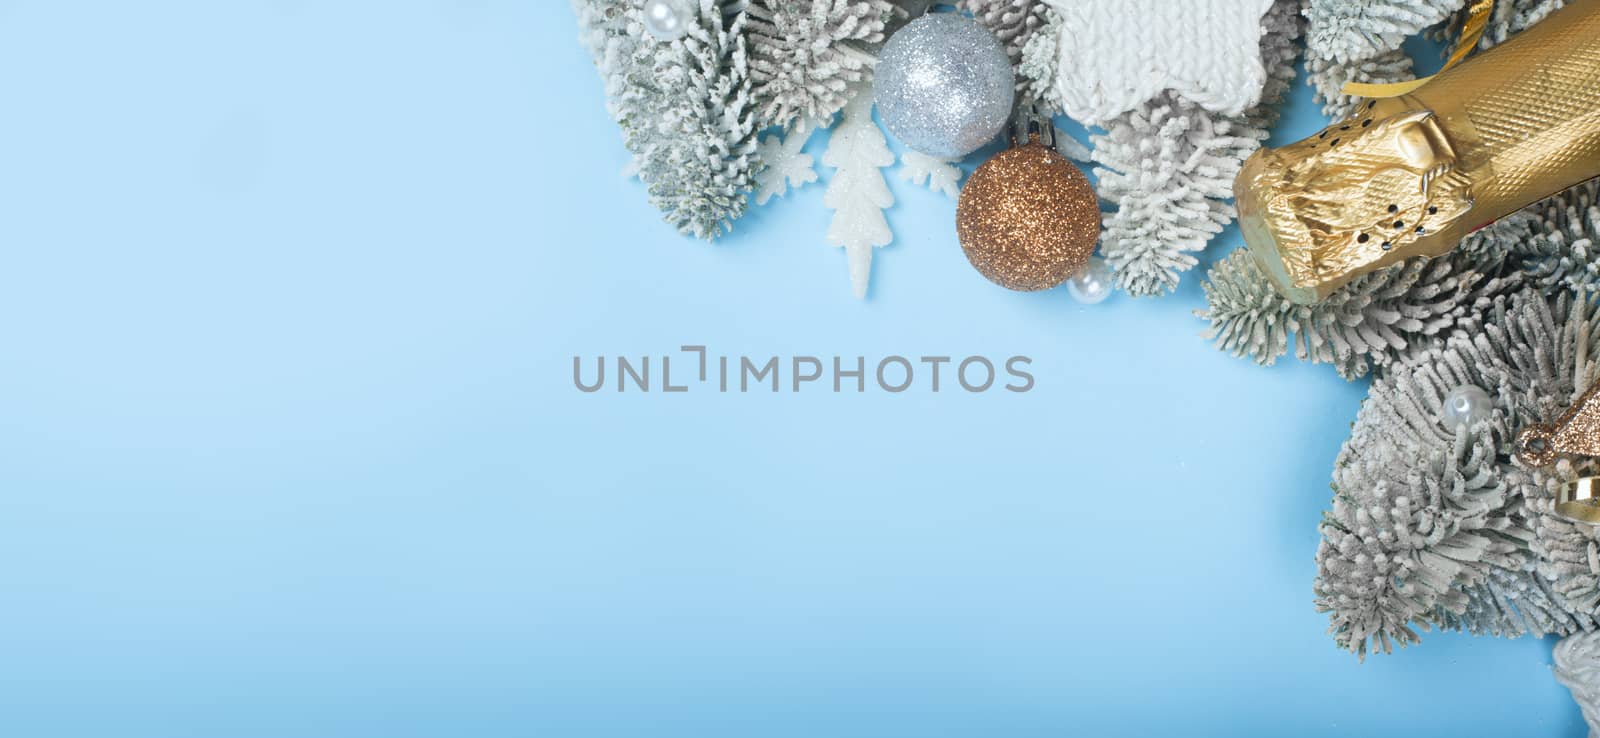 Frosted fir tree twigs and Christmas decorative bauble balls on blue background with copy space for text template flat lay top view design